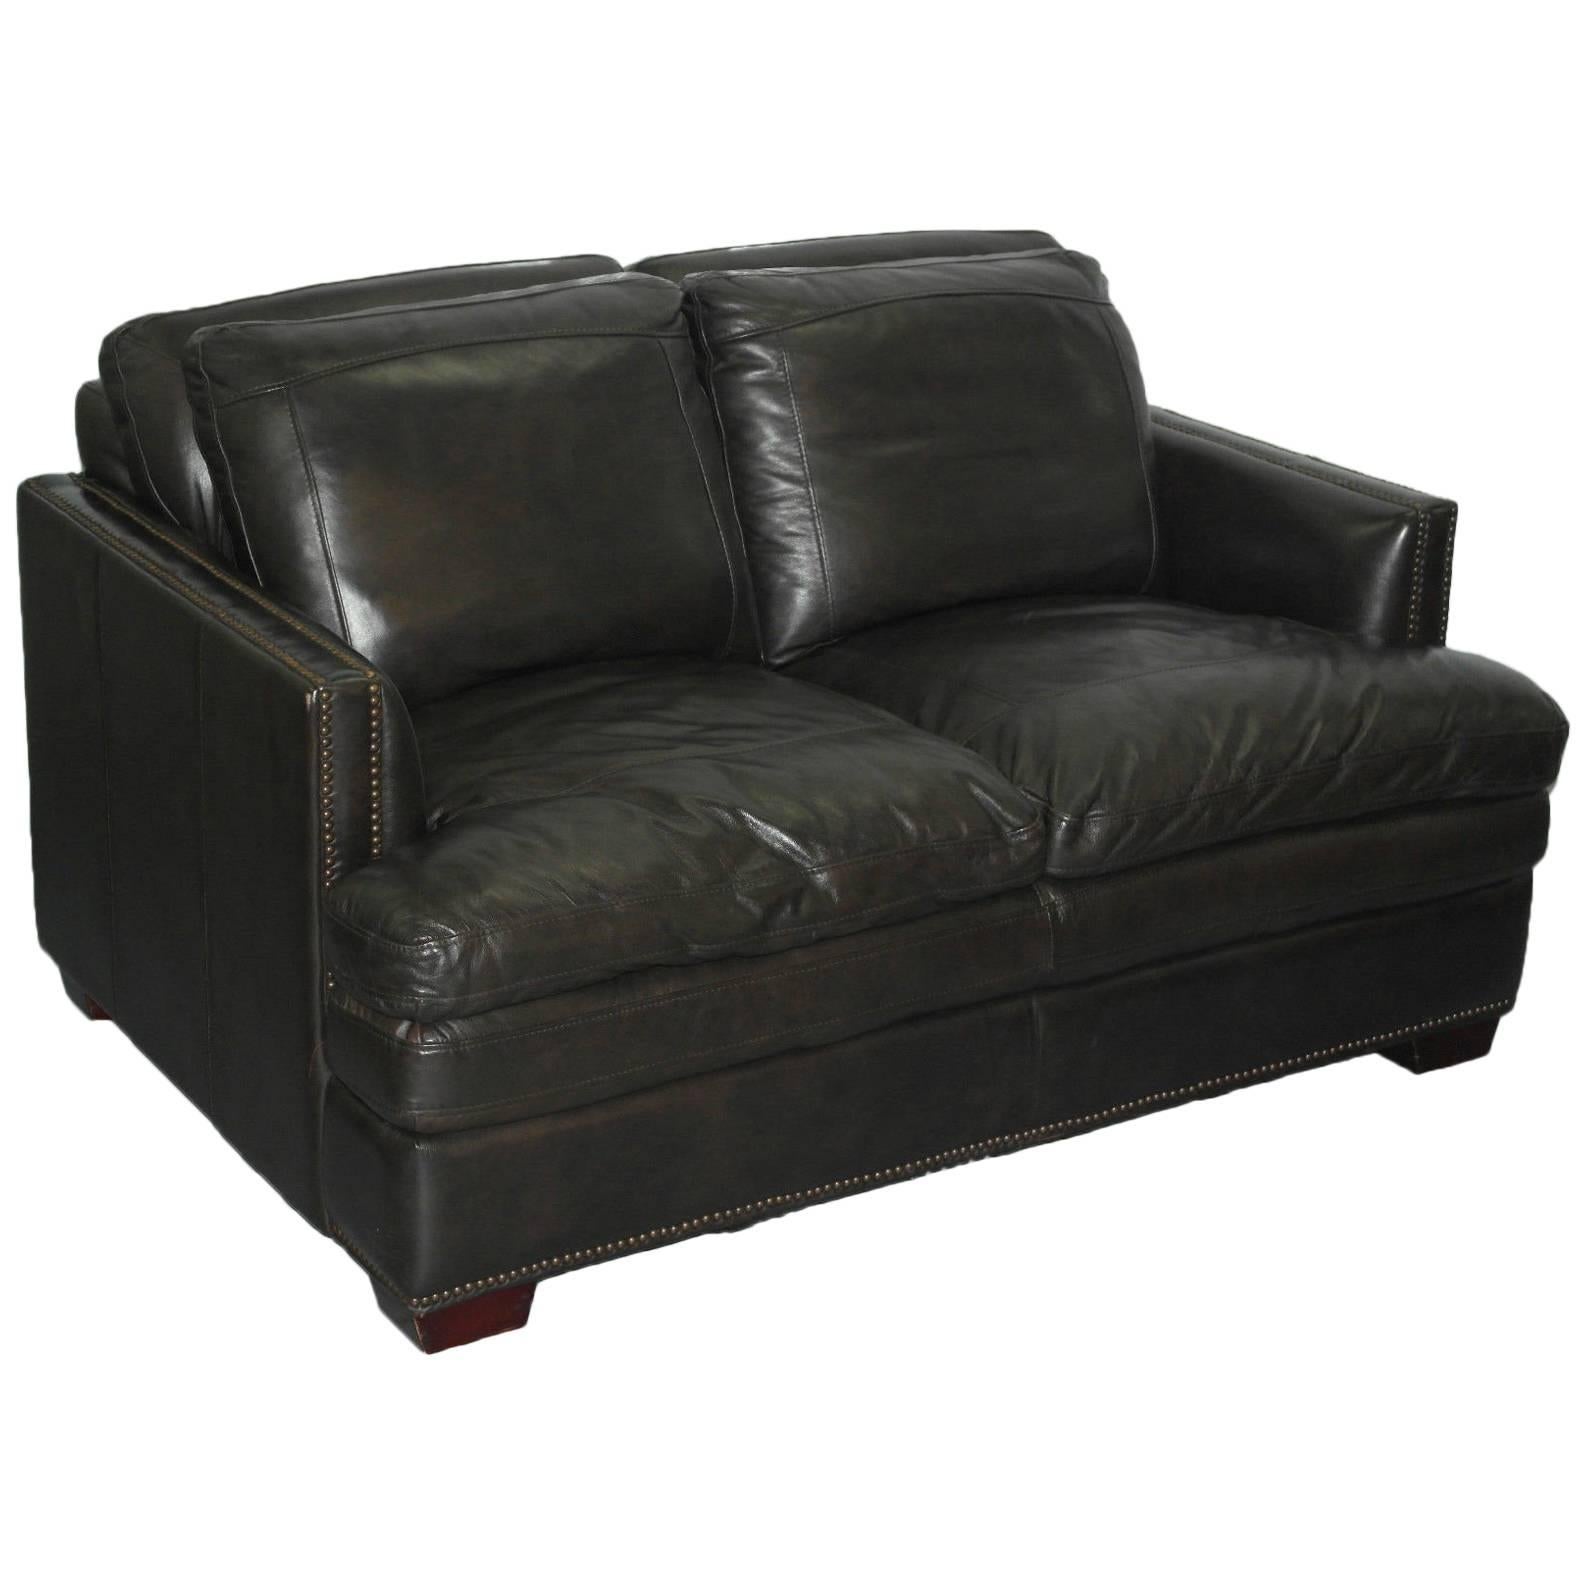 Contemporary Double Cushion Extra Comfortable Brown Leather Studded Club Sofa